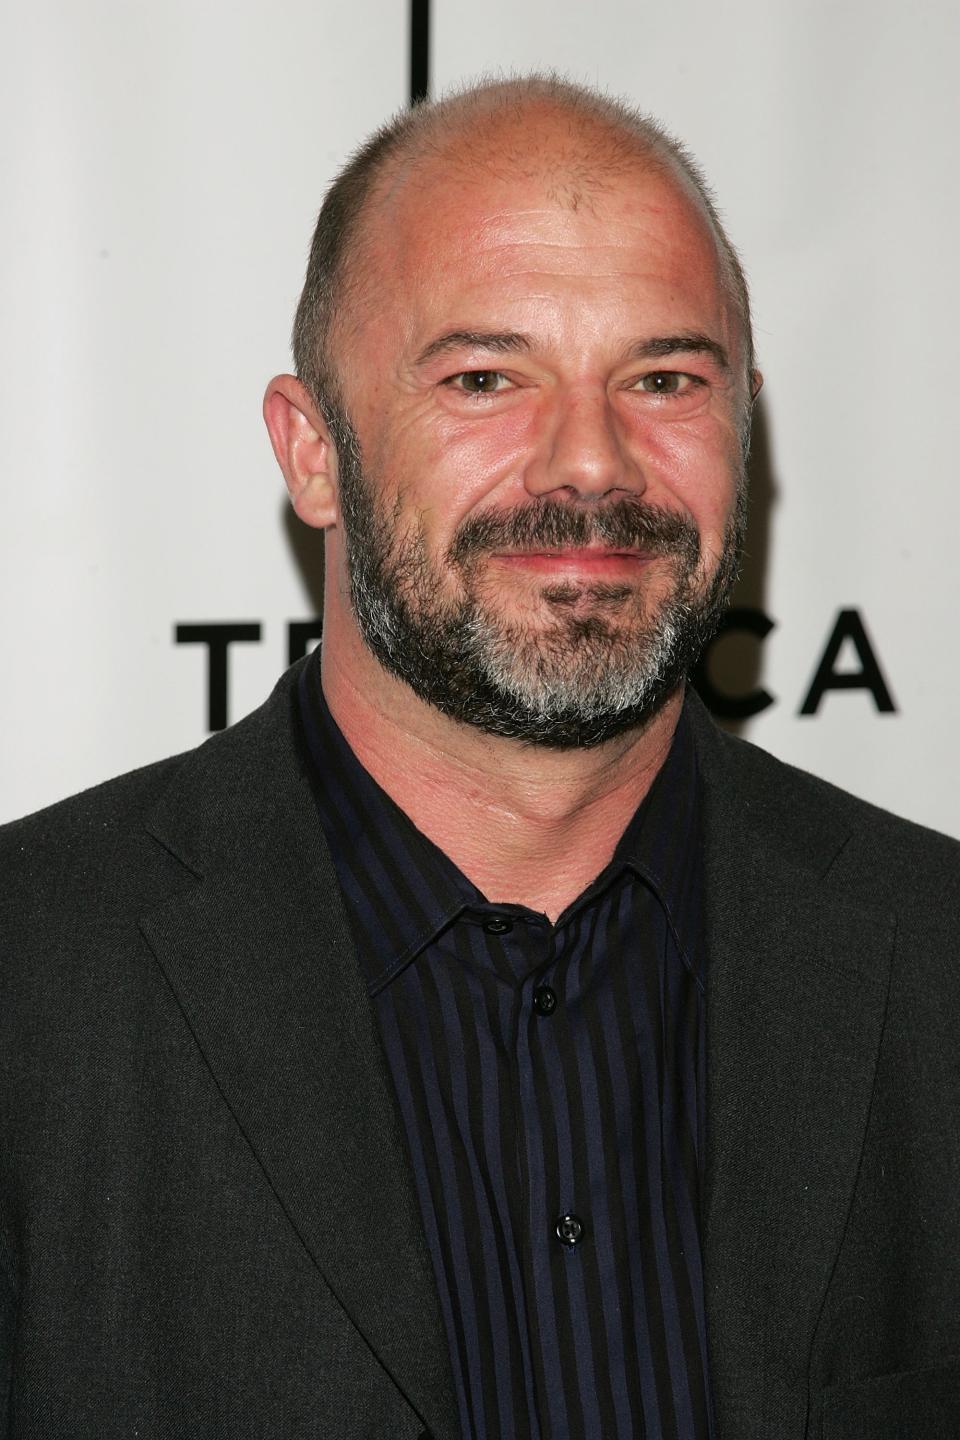 <a href="http://www.boston.com/bostonglobe/ideas/brainiac/2009/09/sullivan_avoids_pot_charges.html" target="_blank">"The blogger and commentator Andrew Sullivan was busted in July for possessing a small amount of marijuana within the Cape Cod National Seashore."</a>